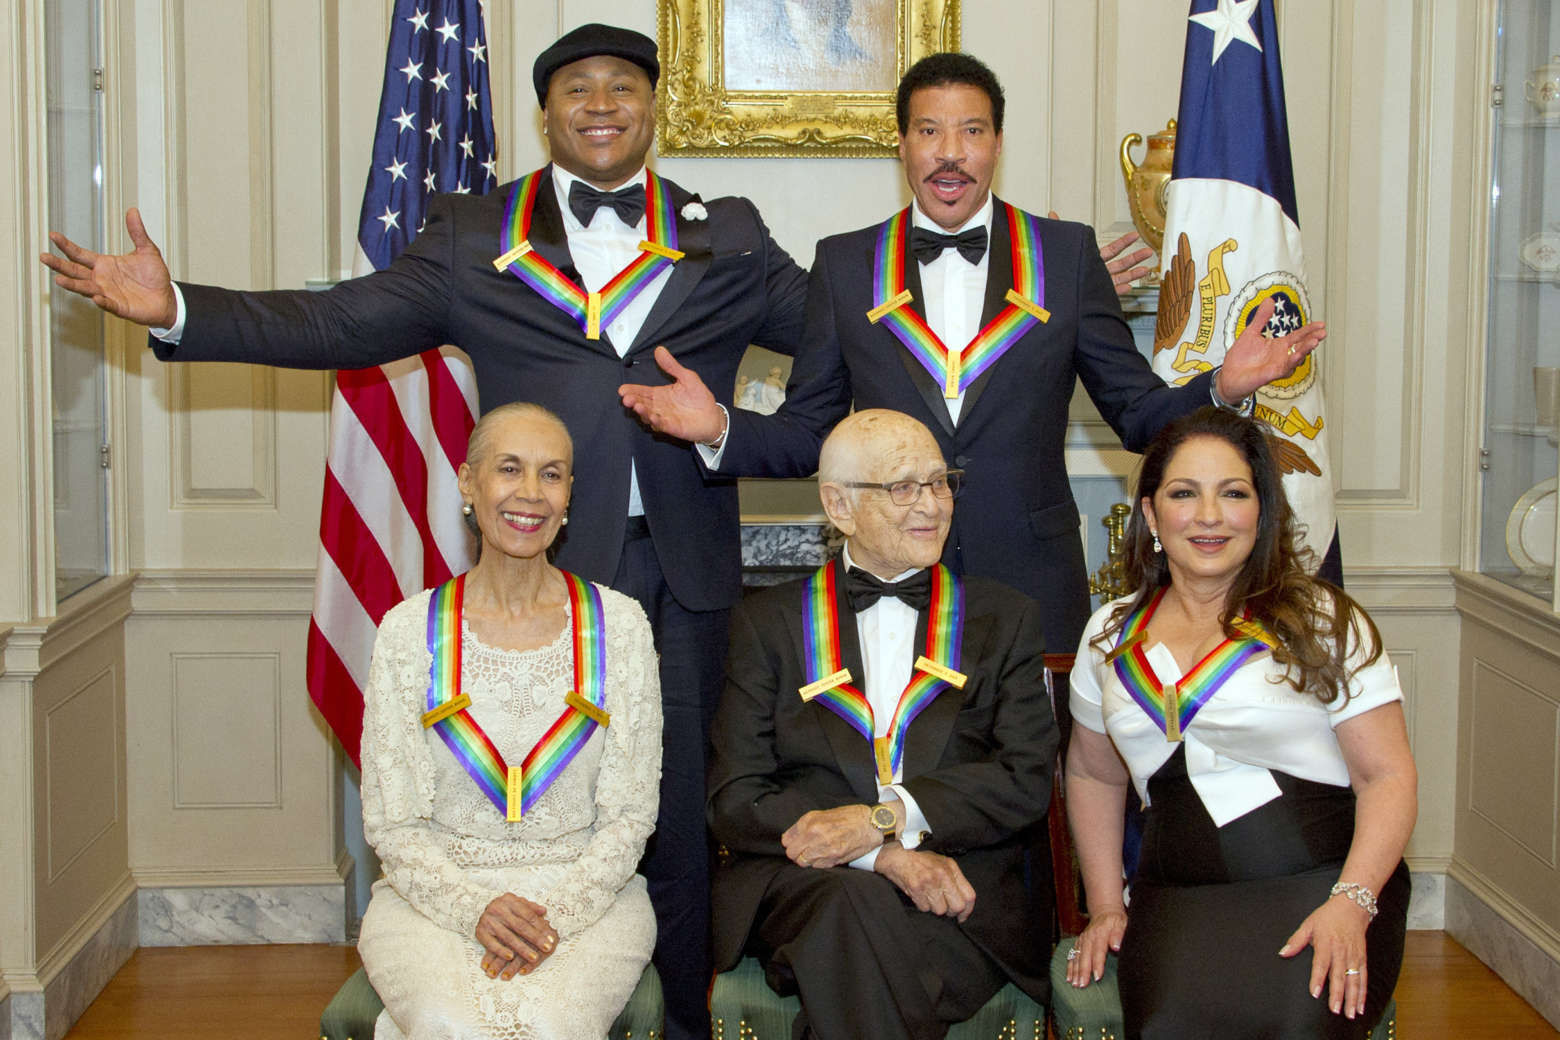 LL Cool J, Lionel Richie, Carmen de Lavallade, Norman Lear and Gloria Estefan receive their Kennedy Center Honors. (Getty Images)